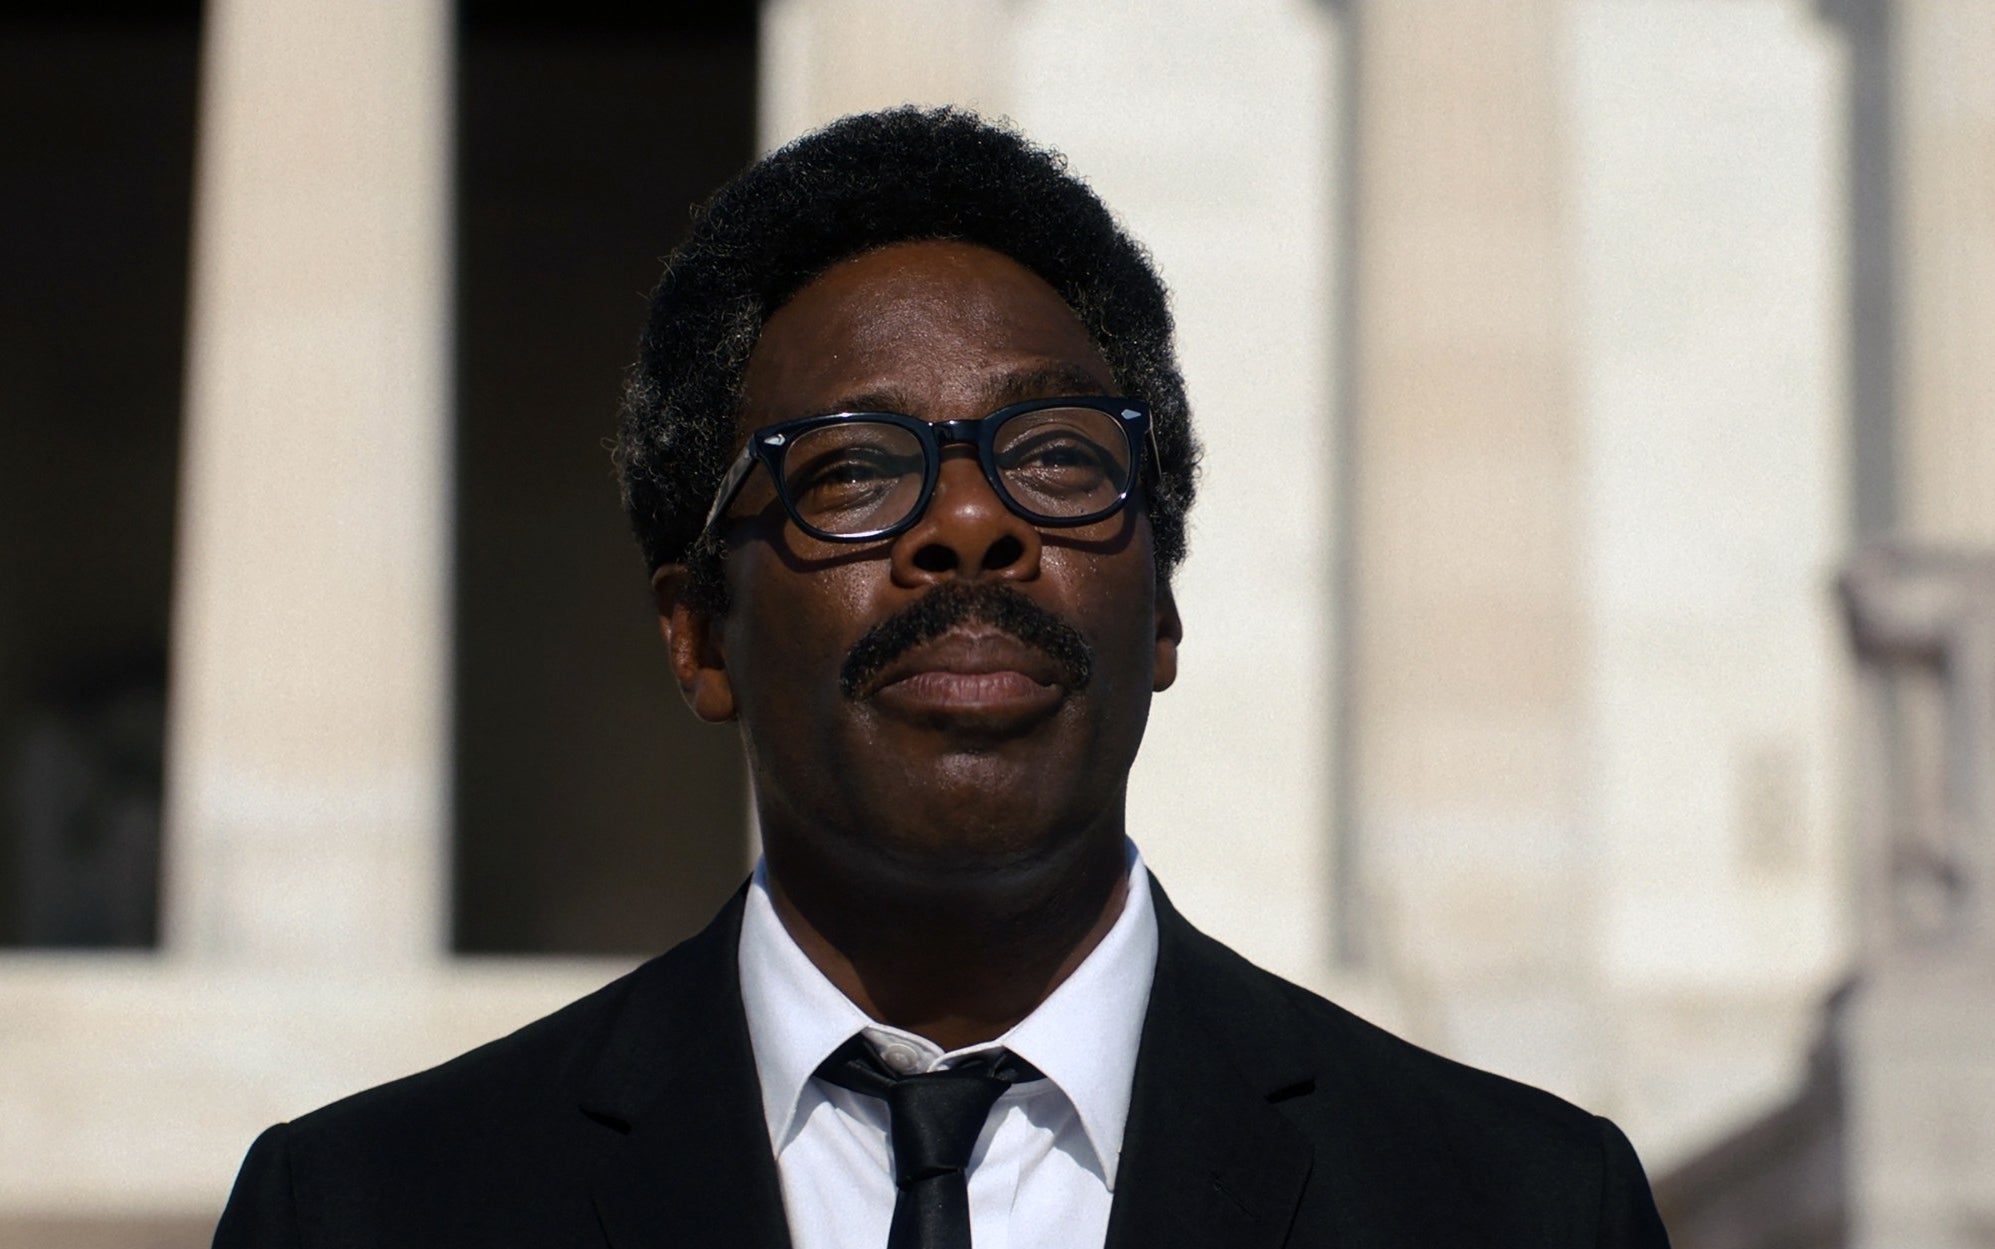 Colman Domingo in a suit and tie with glasses standing in front of a building, expression neutral